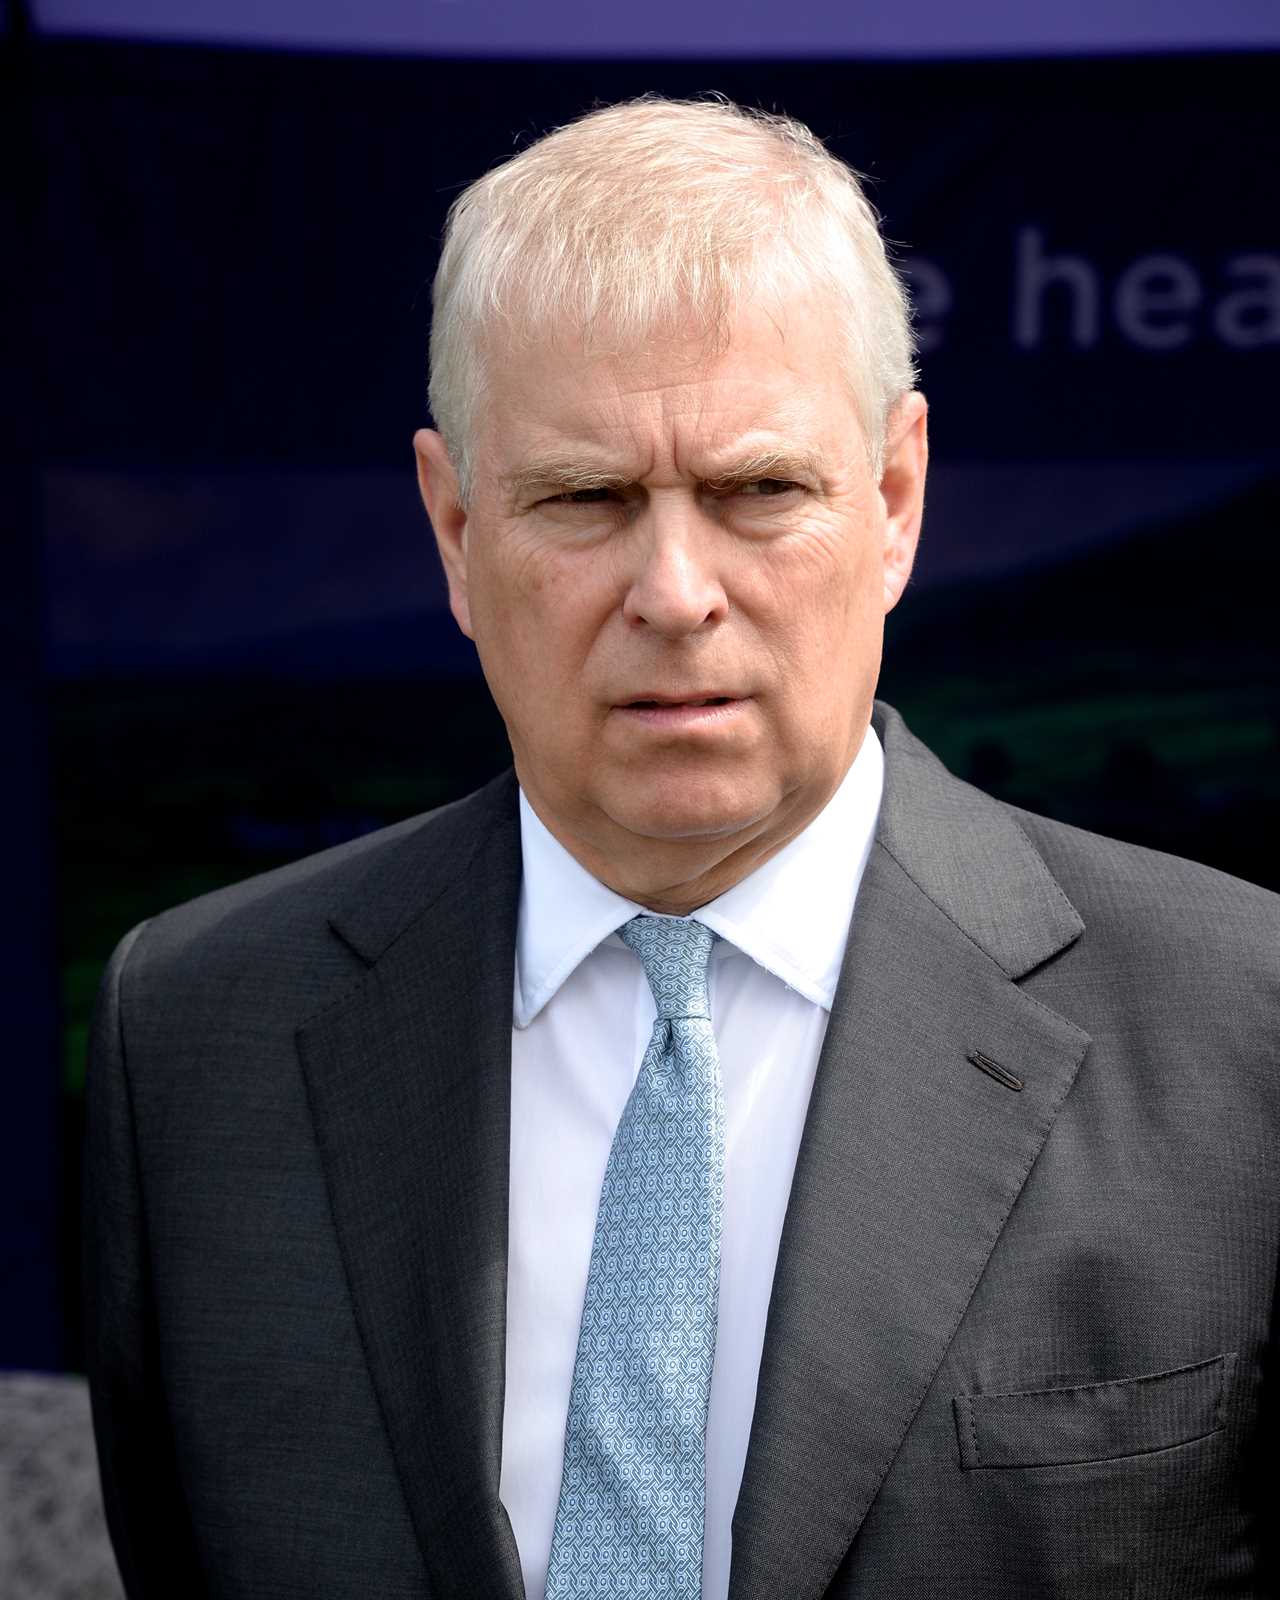 HARROGATE, UNITED KINGDOM - JULY 11:  Prince Andrew,  Duke of York attends the Great Yorkshire Show on July 11, 2019 in Harrogate, England. (Photo by David Moffitt/Getty Images)